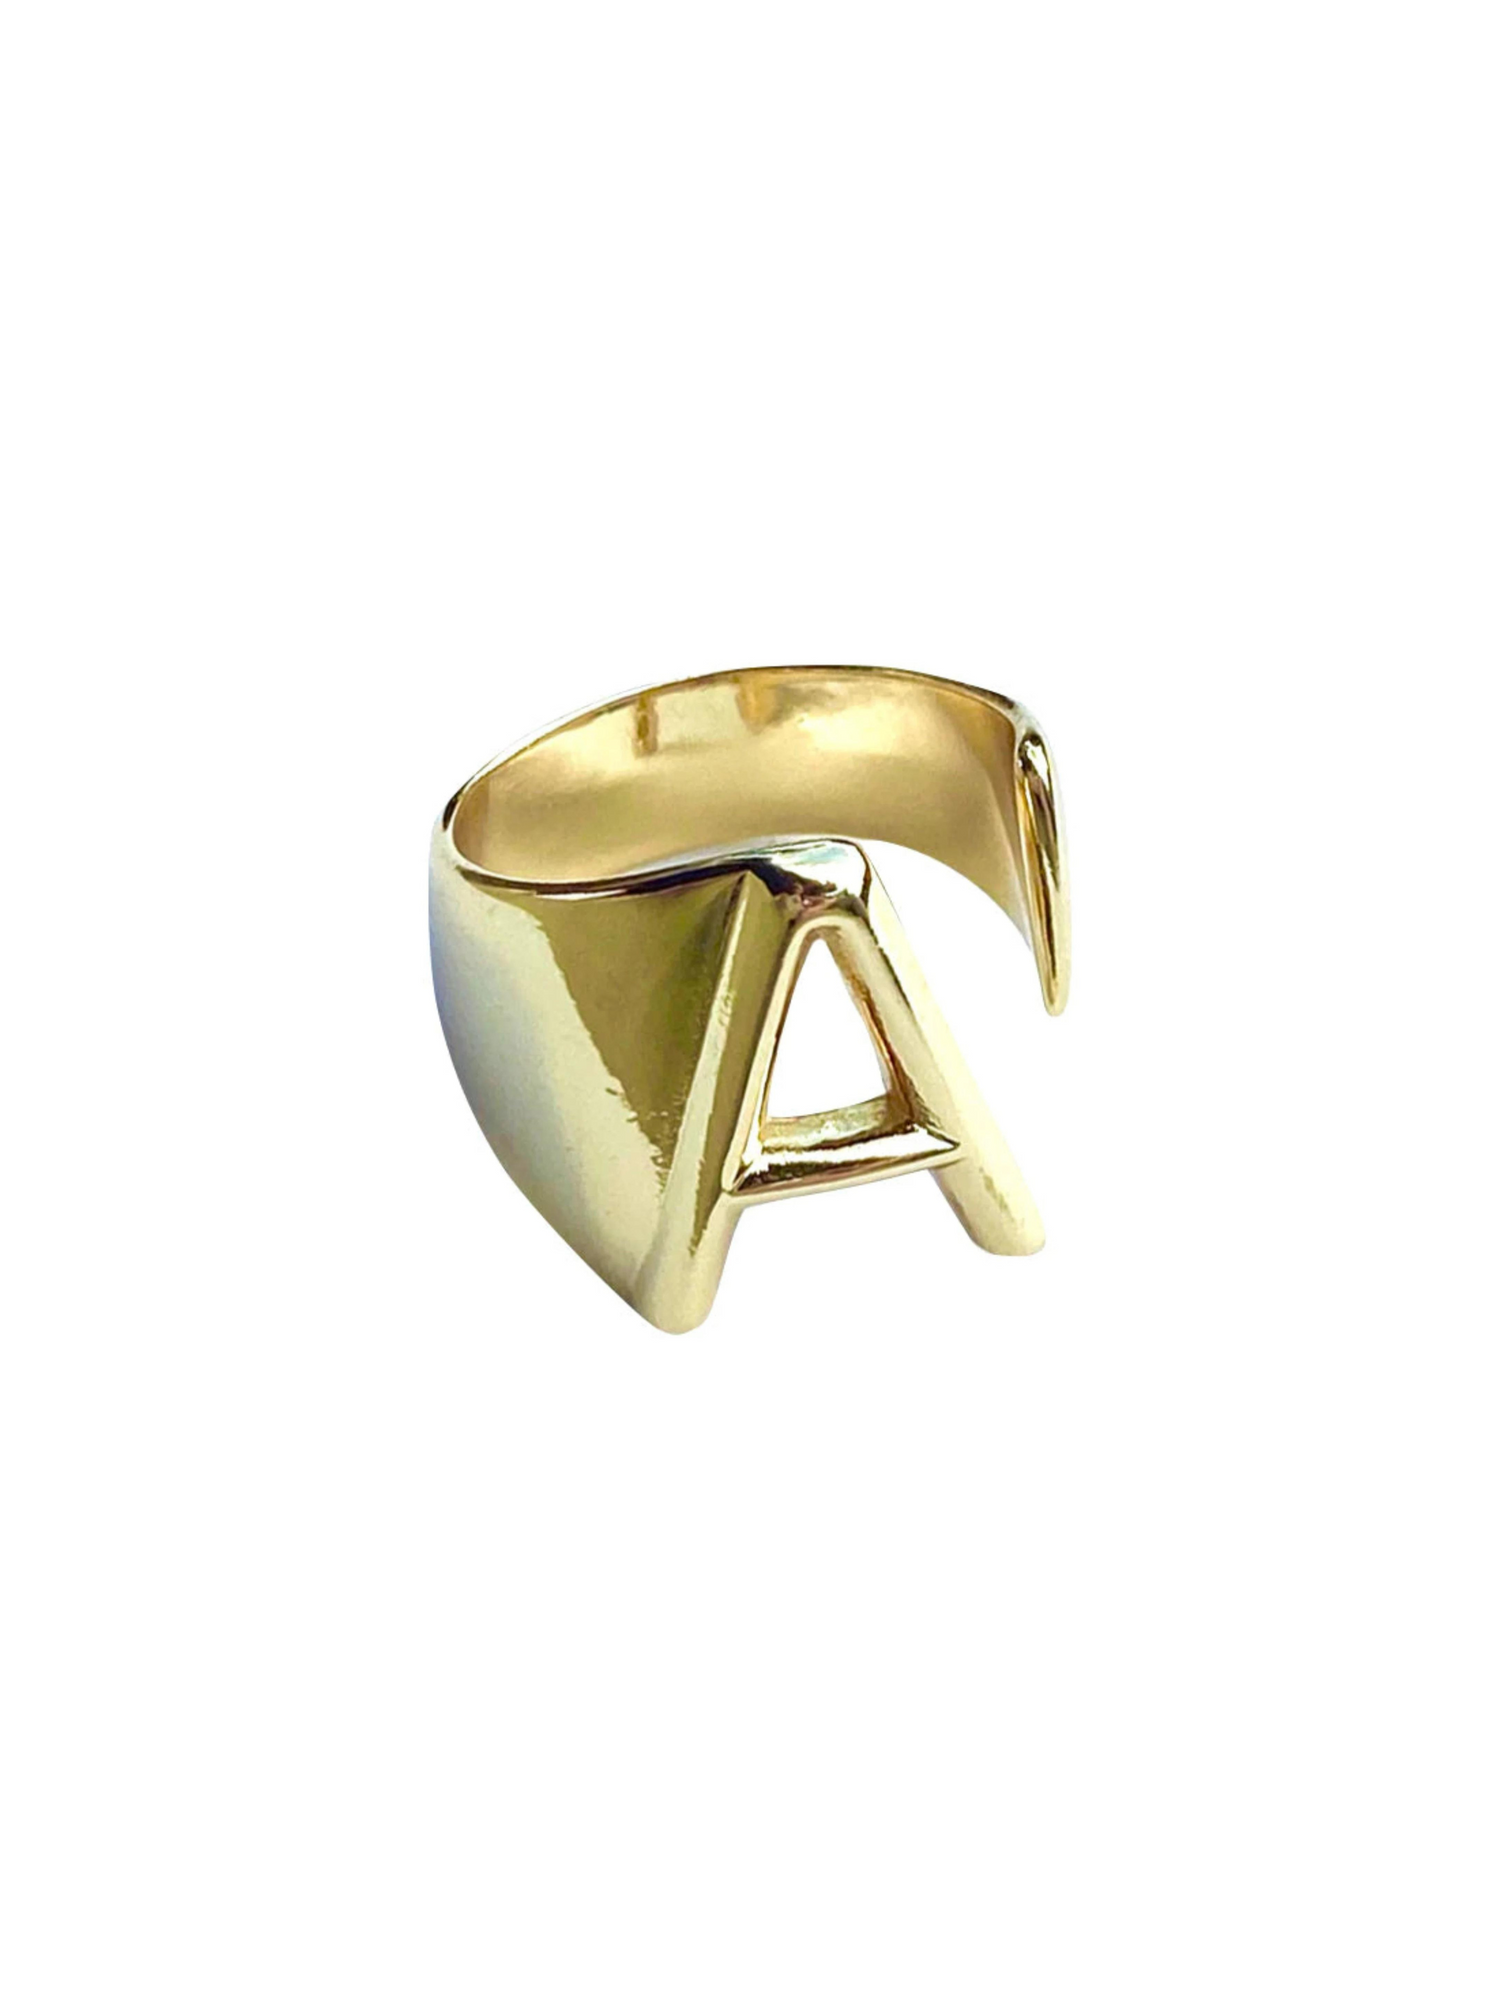 FARRAH B JEWELRY GOLD SOLO INITIAL RING - THE HIP EAGLE BOUTIQUE